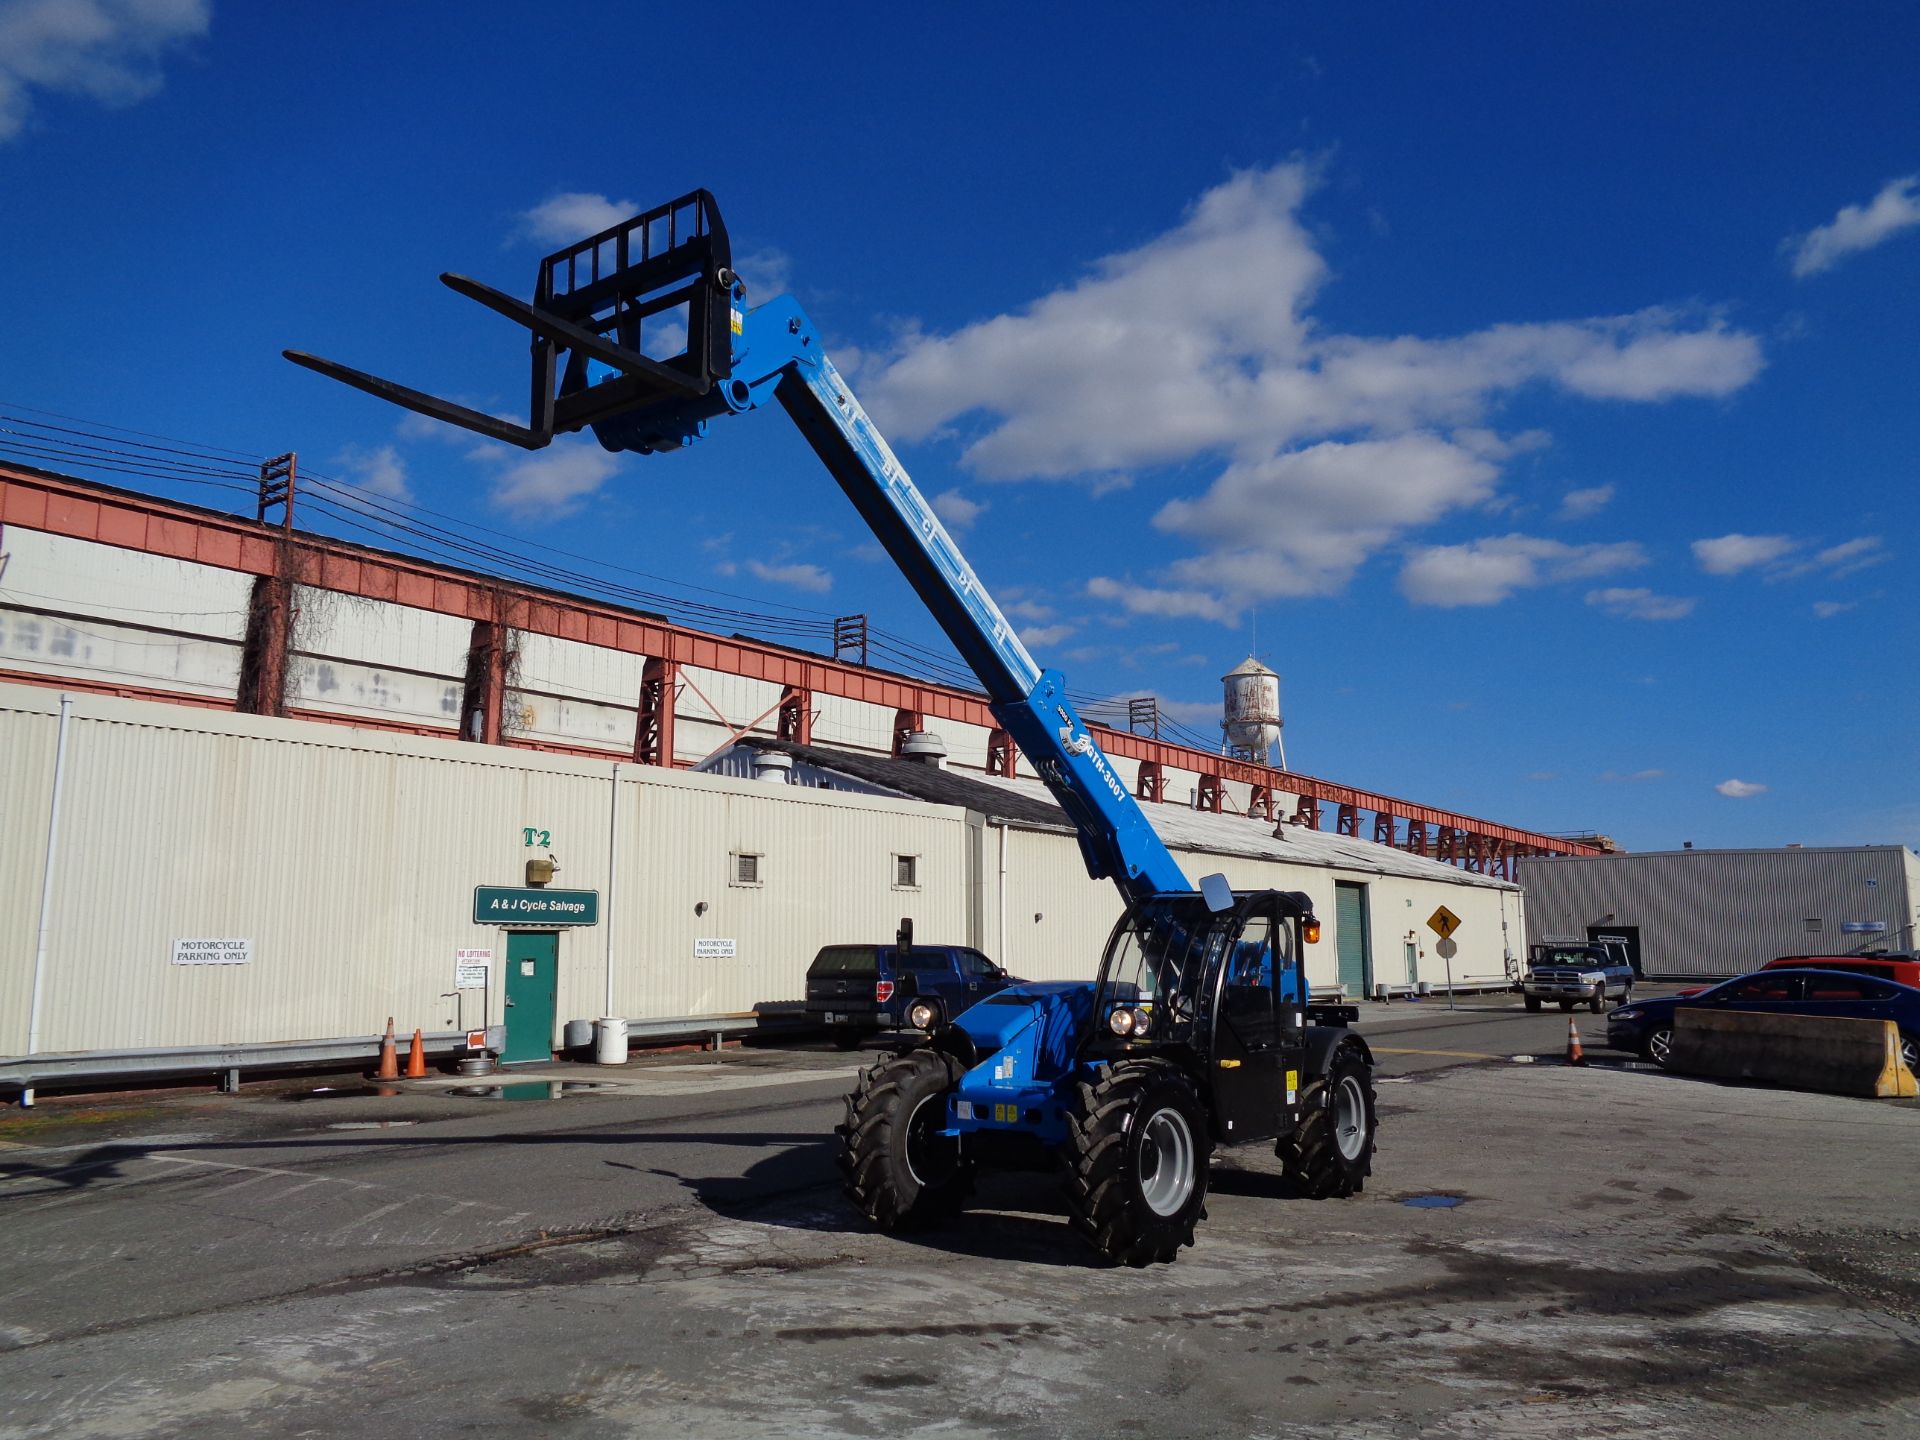 New Unused 2018 Genie GTH3007 Telescopic Forklift 6,600 lbs - Enclosed Cab - Image 7 of 23